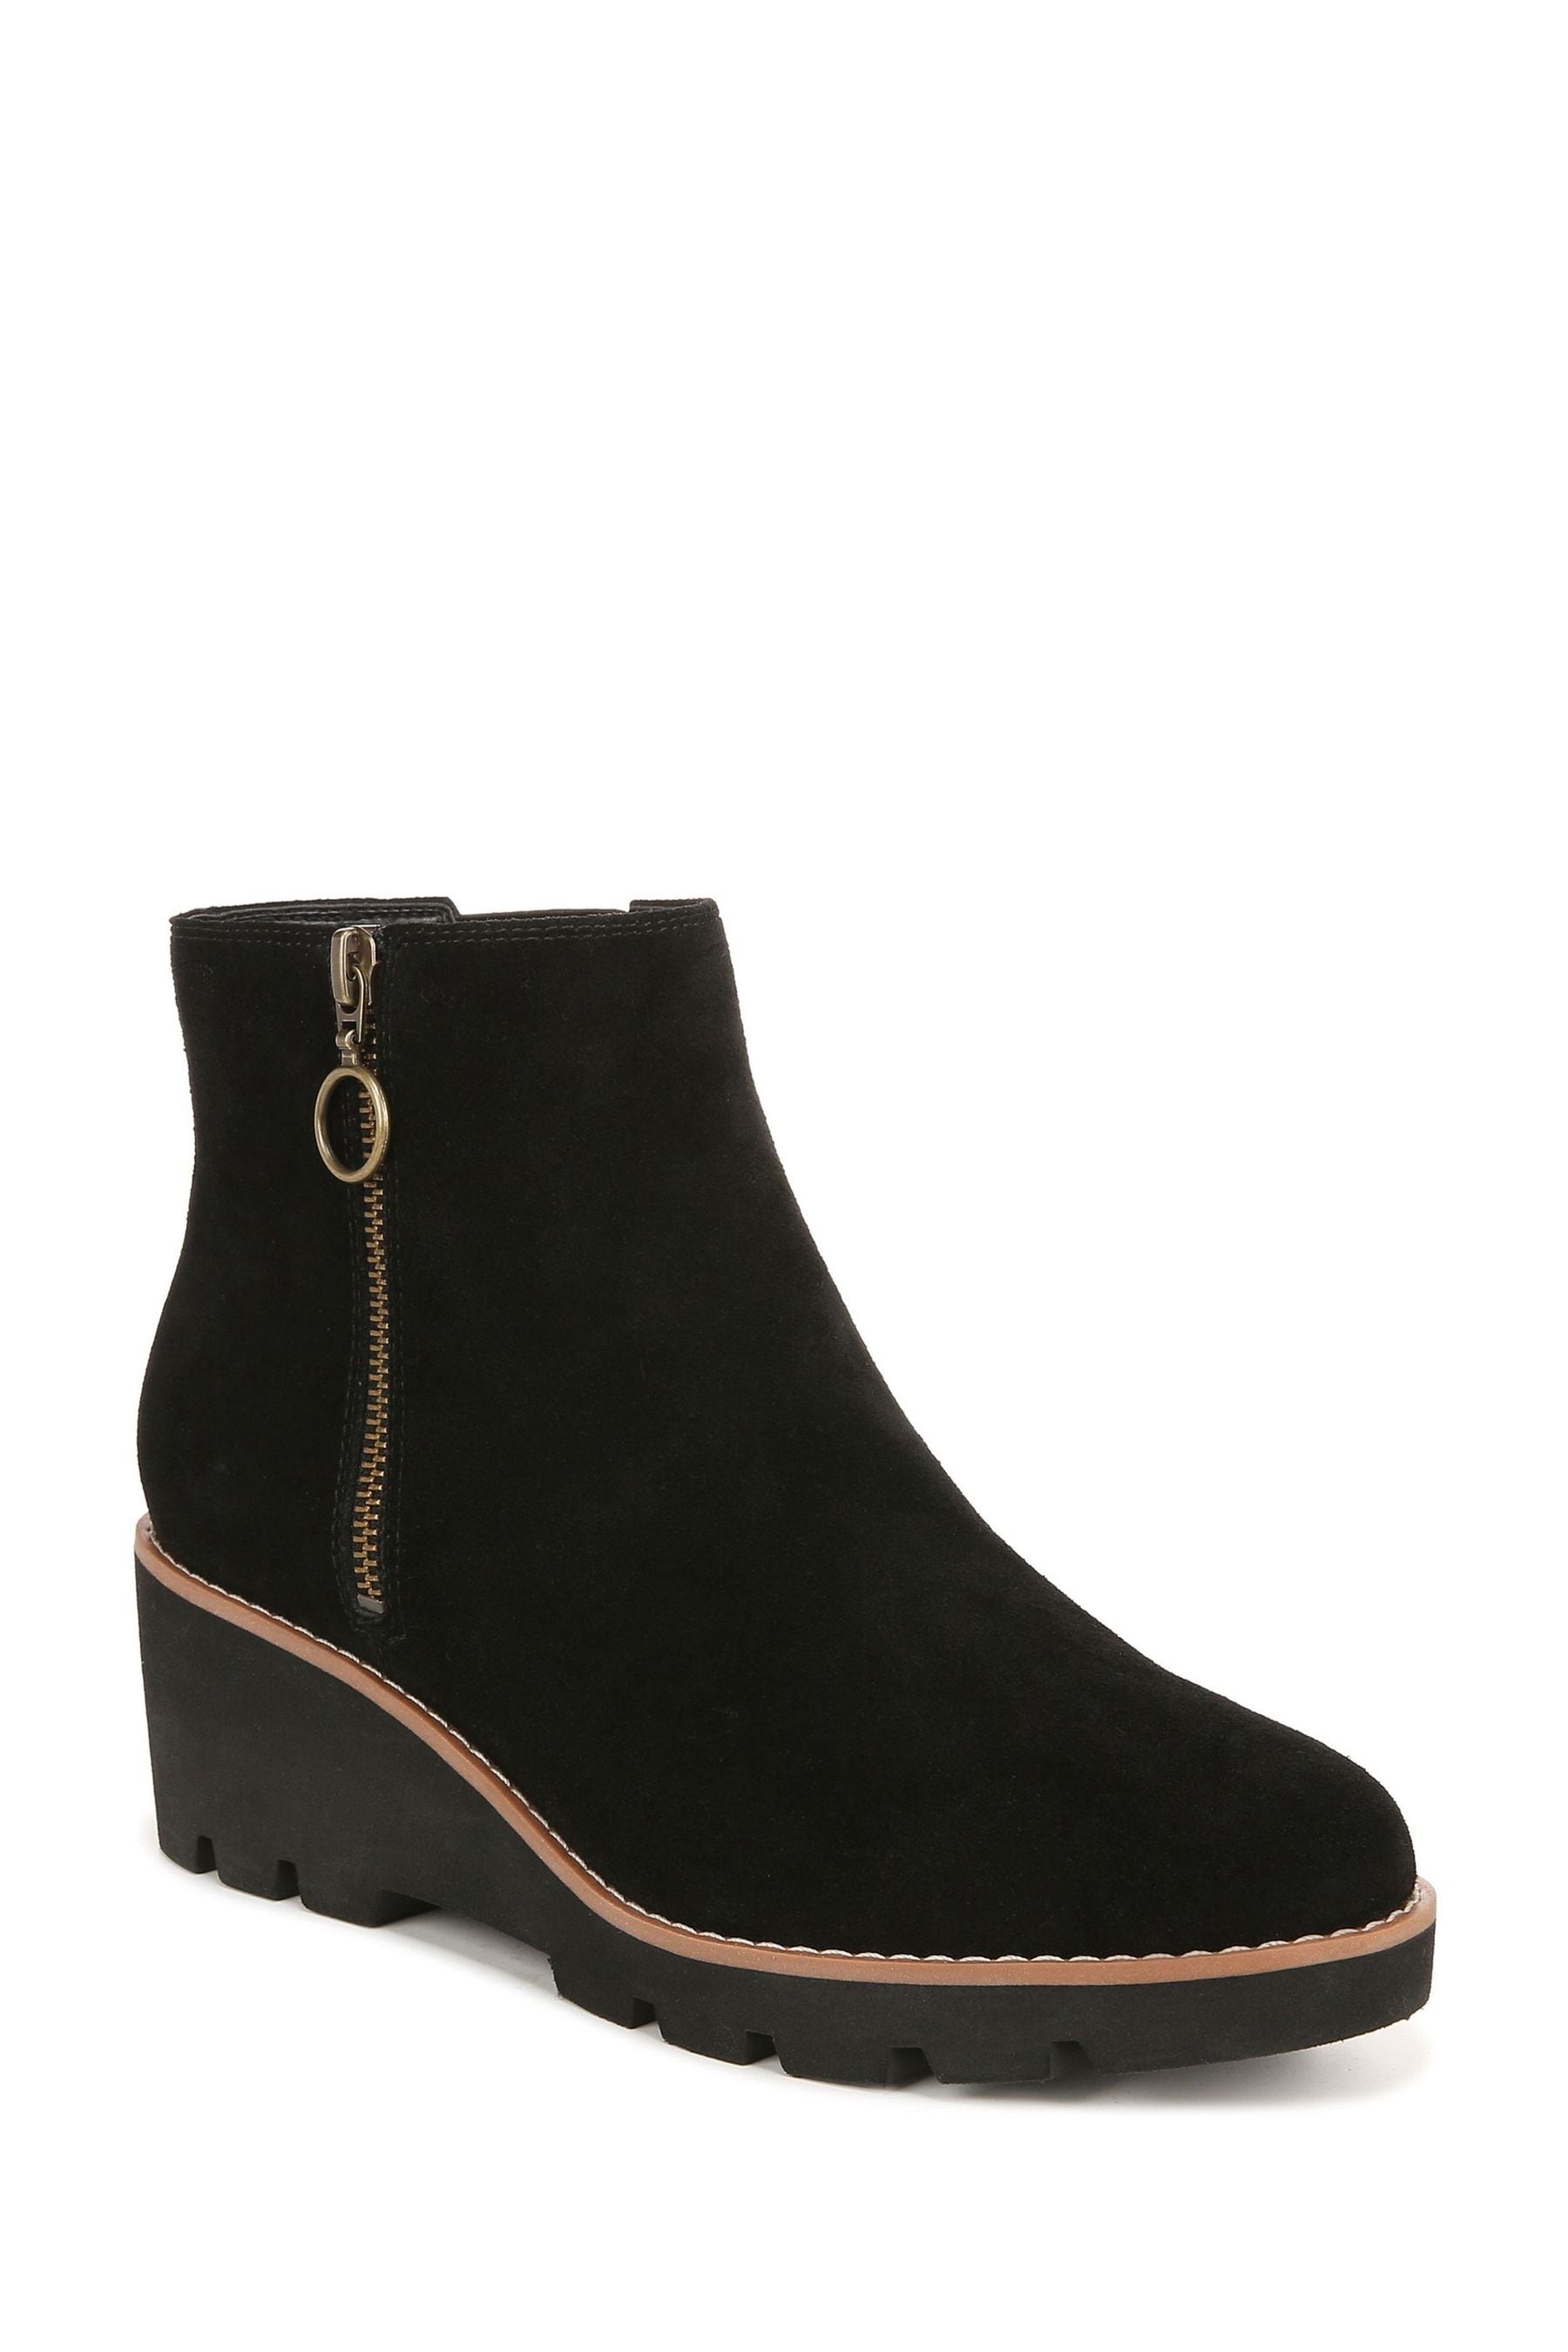 Buy Vionic Hazal Suede Ankle Black Boots from the Next UK online shop